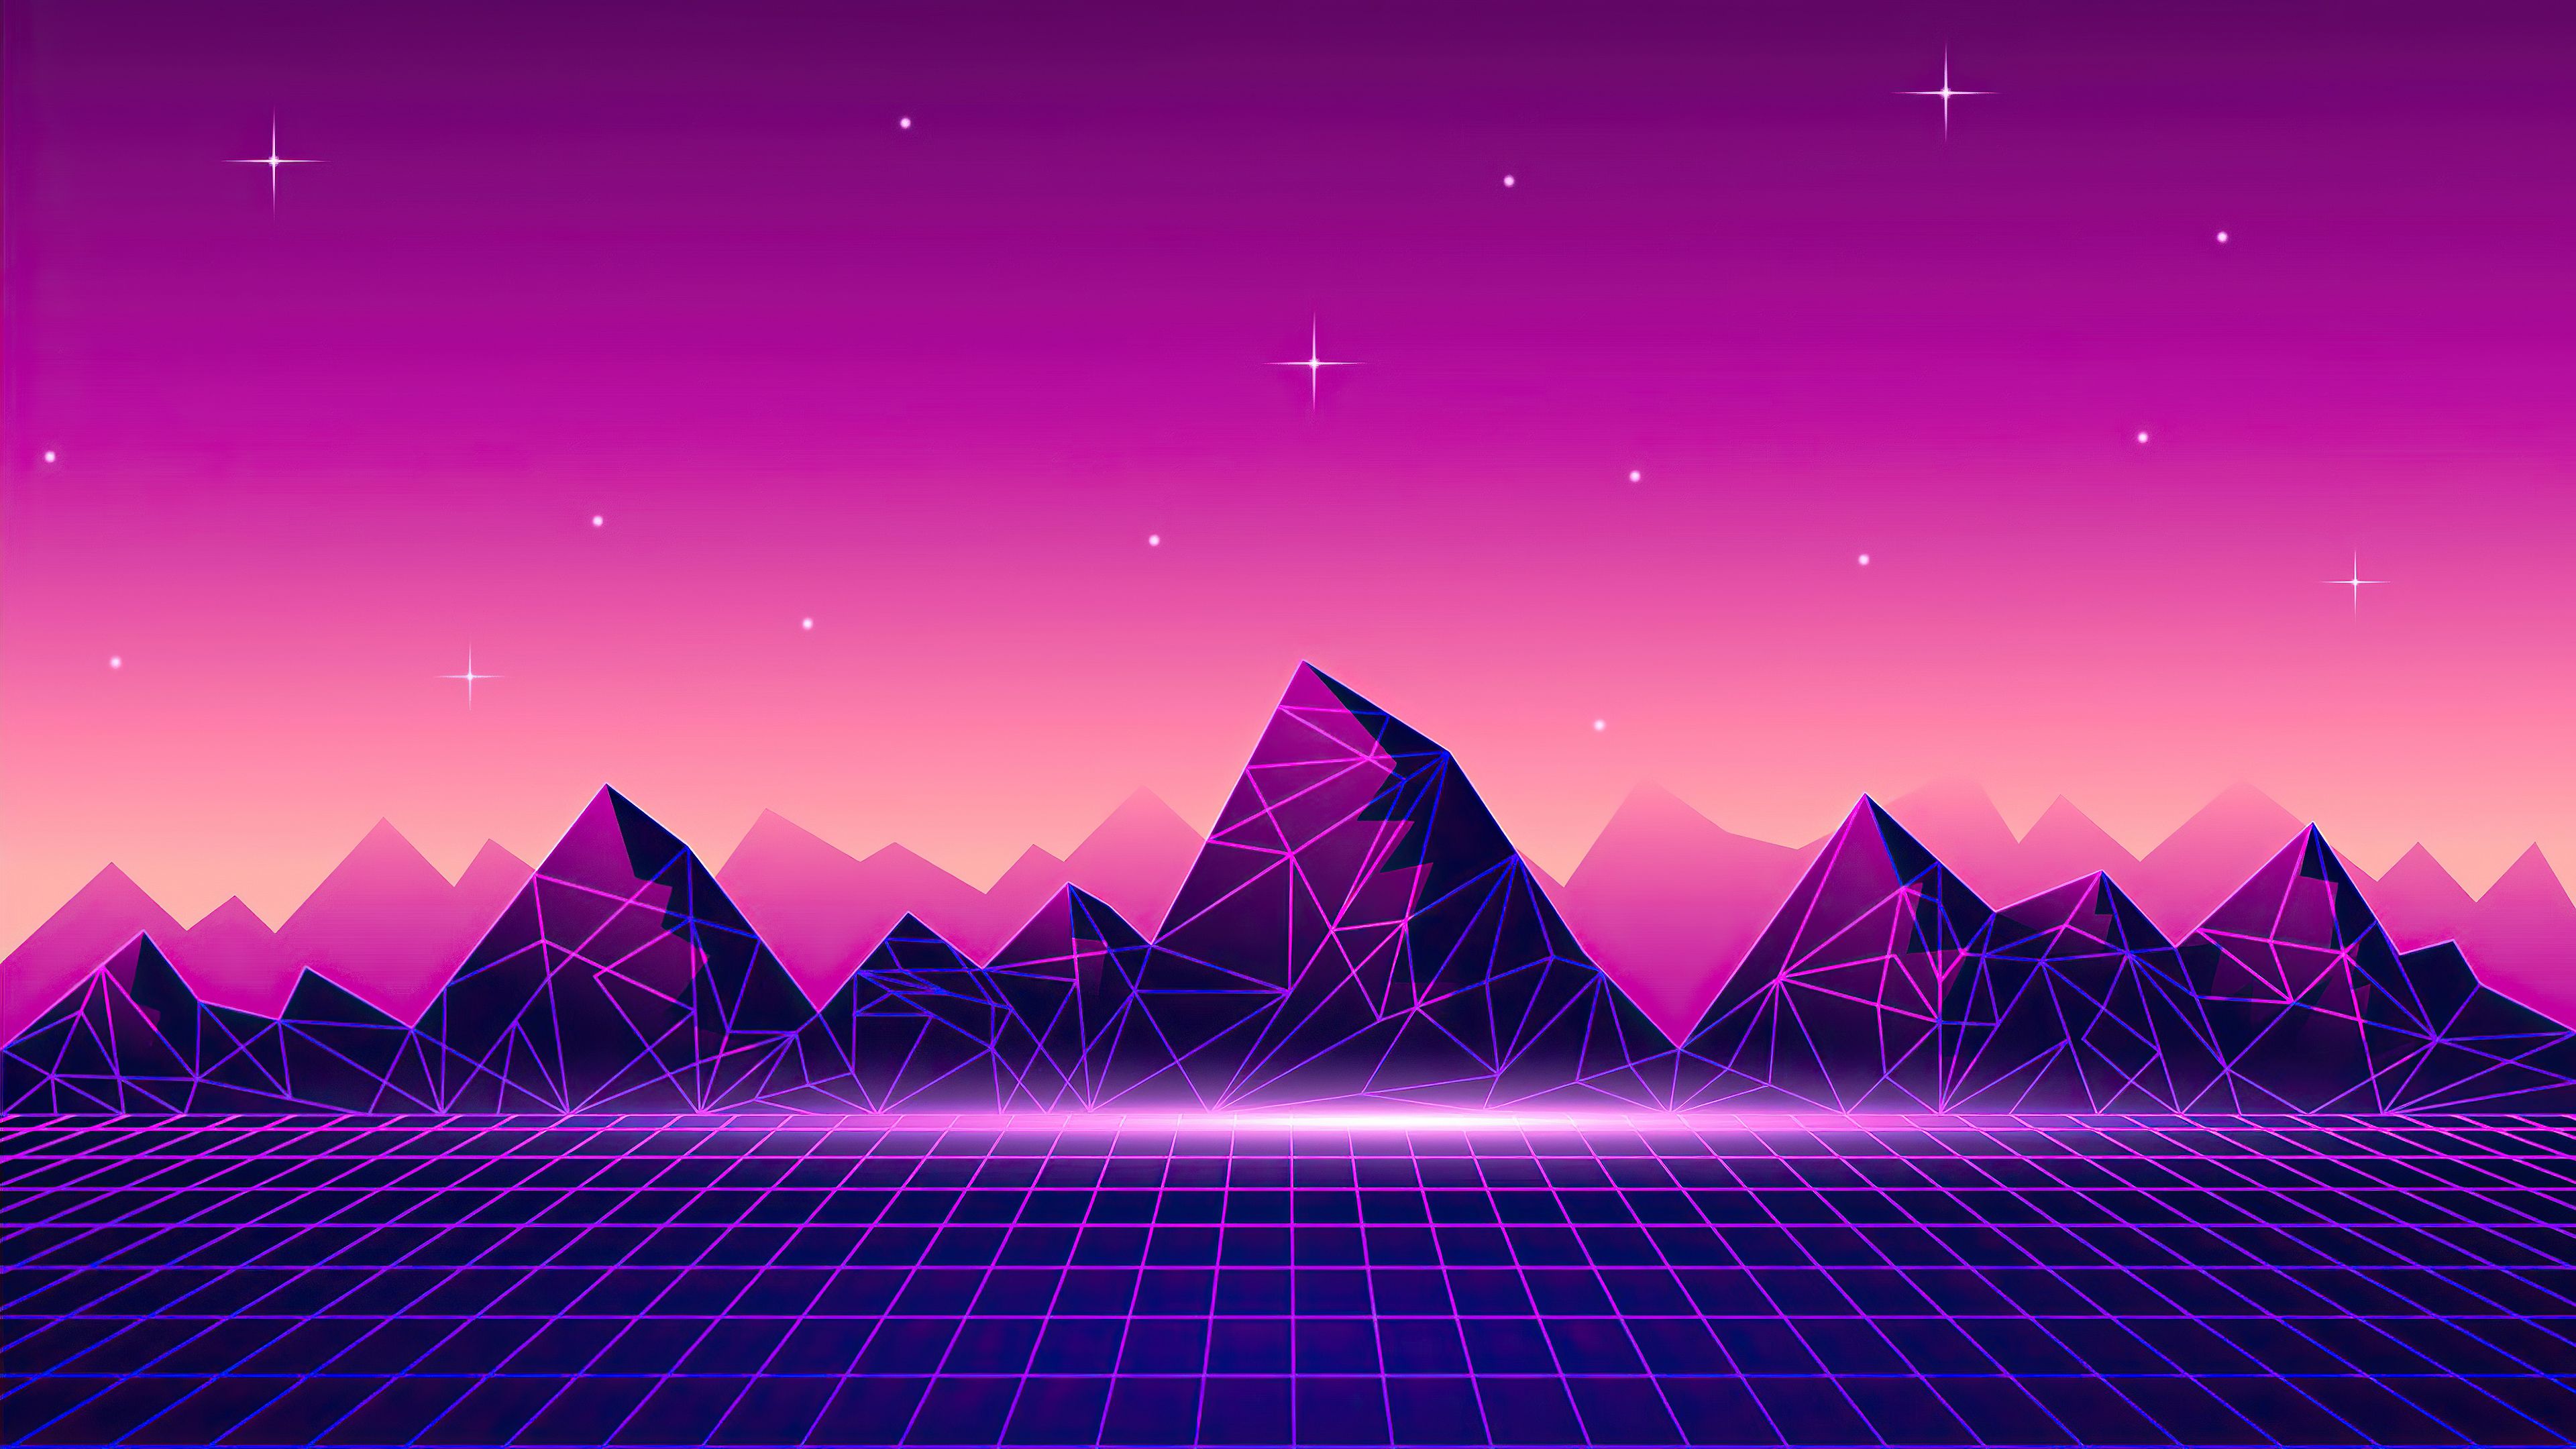 A futuristic purple and pink landscape with a mountain range - Synthwave